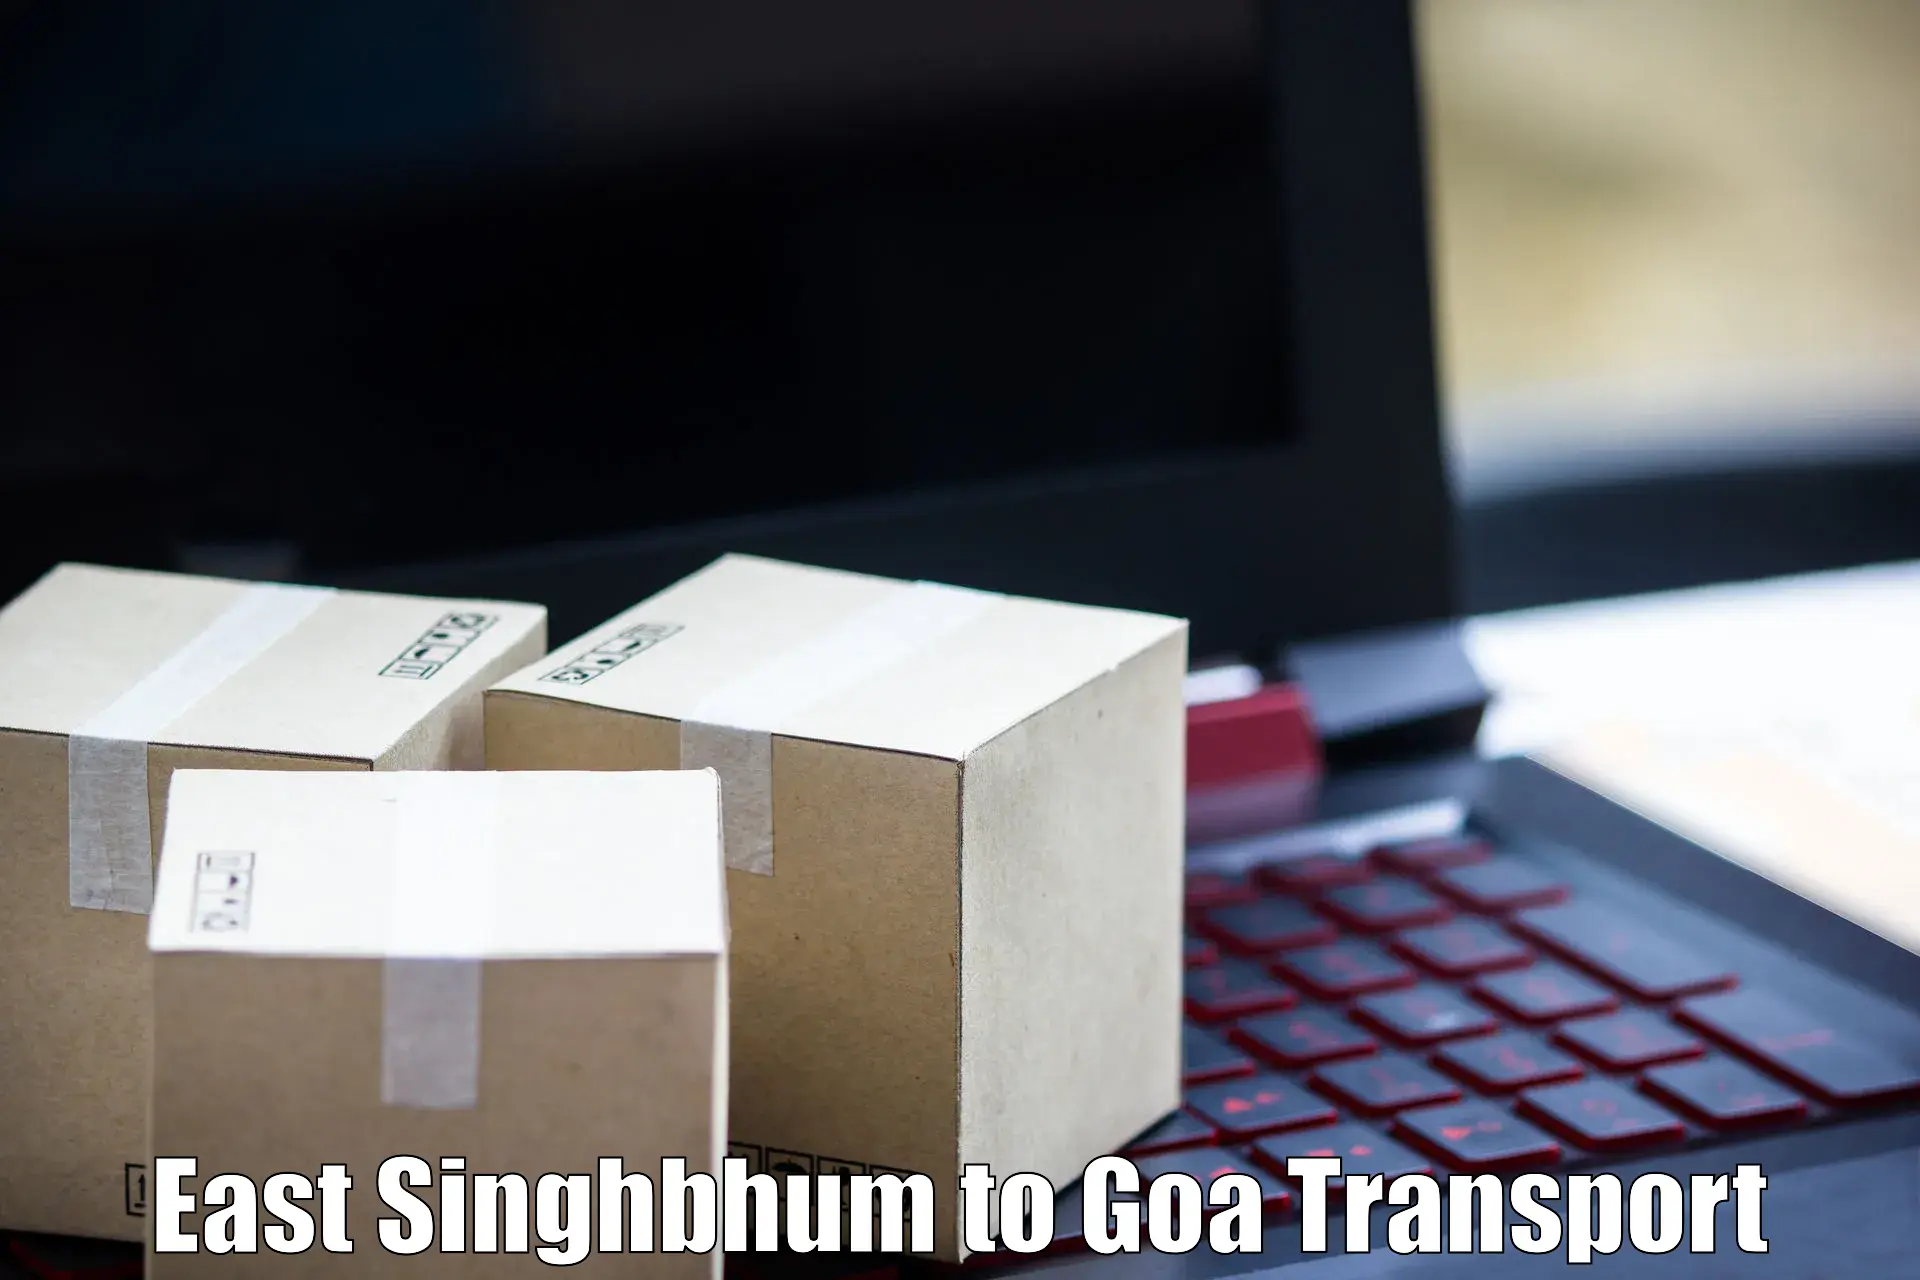 Express transport services East Singhbhum to South Goa